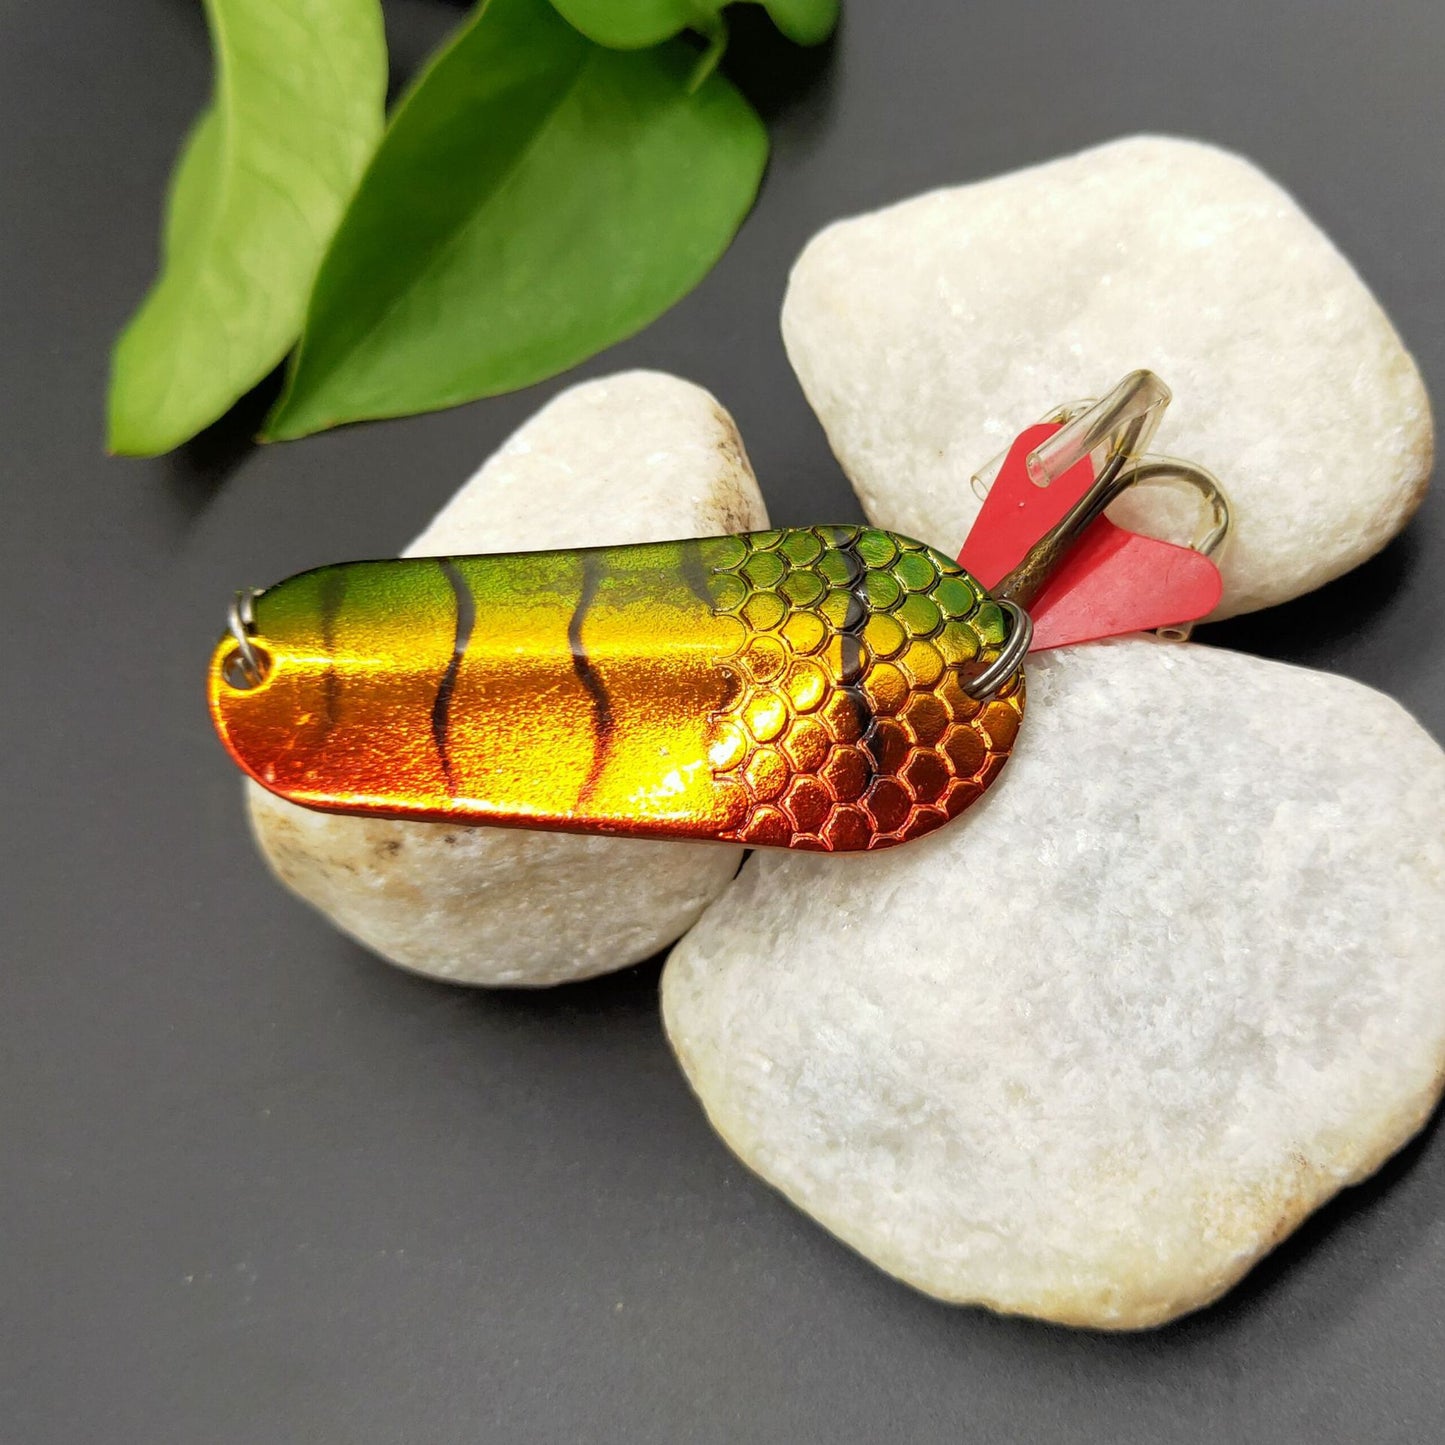 2Pc Pesca Isca Artificial Bait Rainbow Trout Spoon 19g 5.5cm Metal Fishing Lure Spoon Lure For Trout Perch Pike Salmon Long Shot